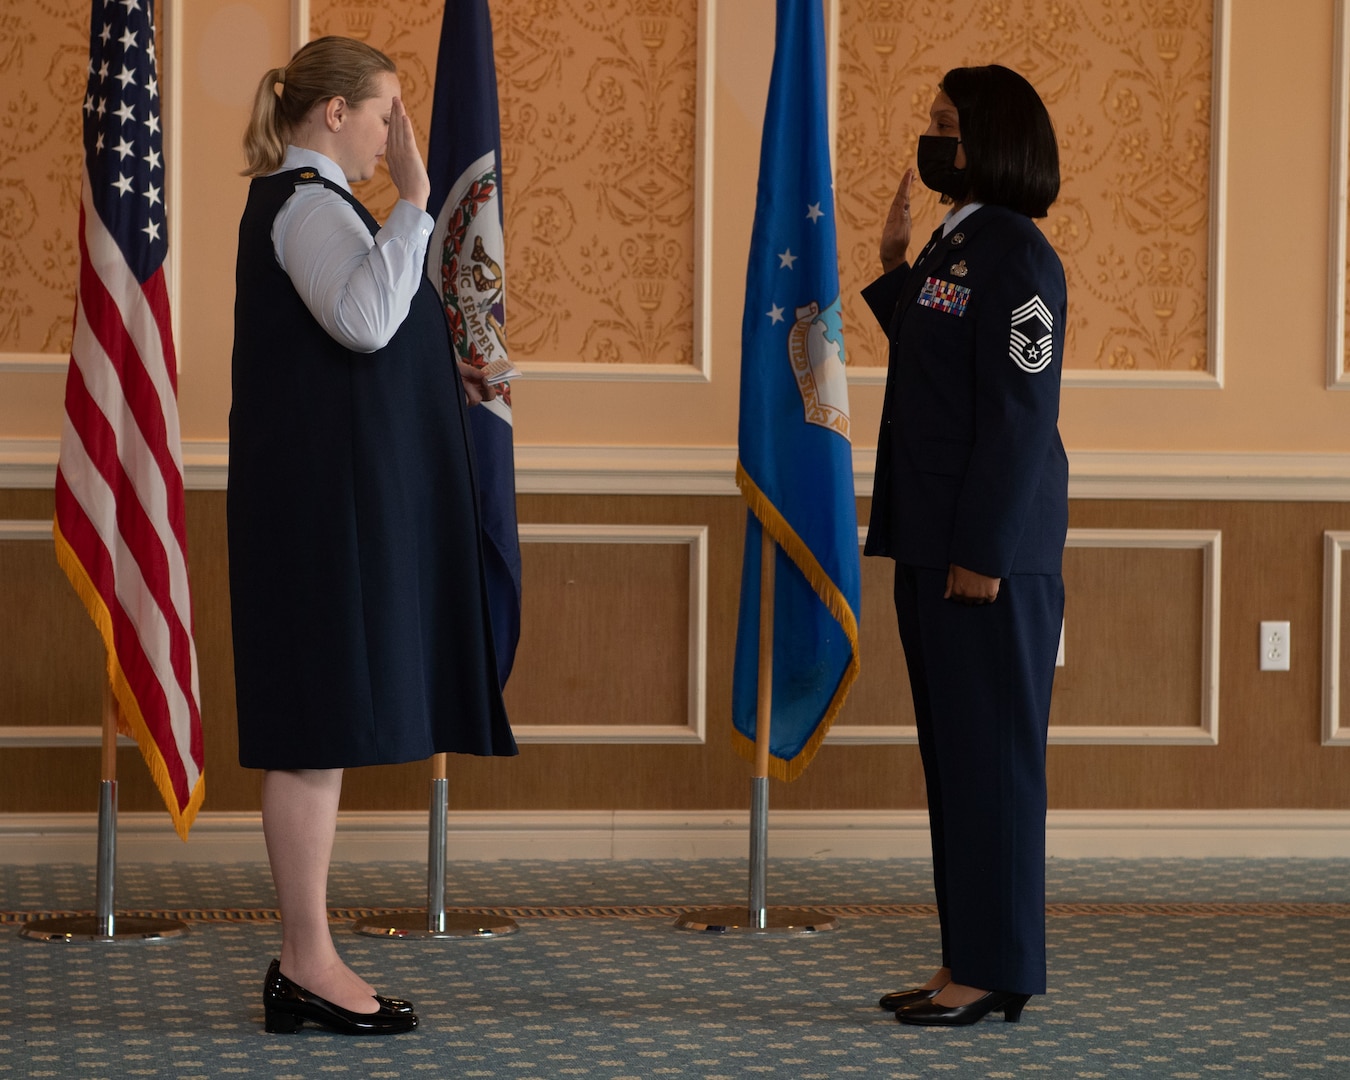 Maj. Erica Legg, 192nd Support Squadron director of operations, performs the Oath of Enlistment for Chief Master Sgt. Lawanda Jackson, 192nd SS Mobility Flight chief, during her promotion ceremony on July 10, 2021, at Joint Base Langley-Eustis, Virginia. When an Airman is promoted to chief, it is tradition to perform the Oath of Enlistment. (U.S. Air National Guard photo by Staff Sgt. Bryan Myhr)